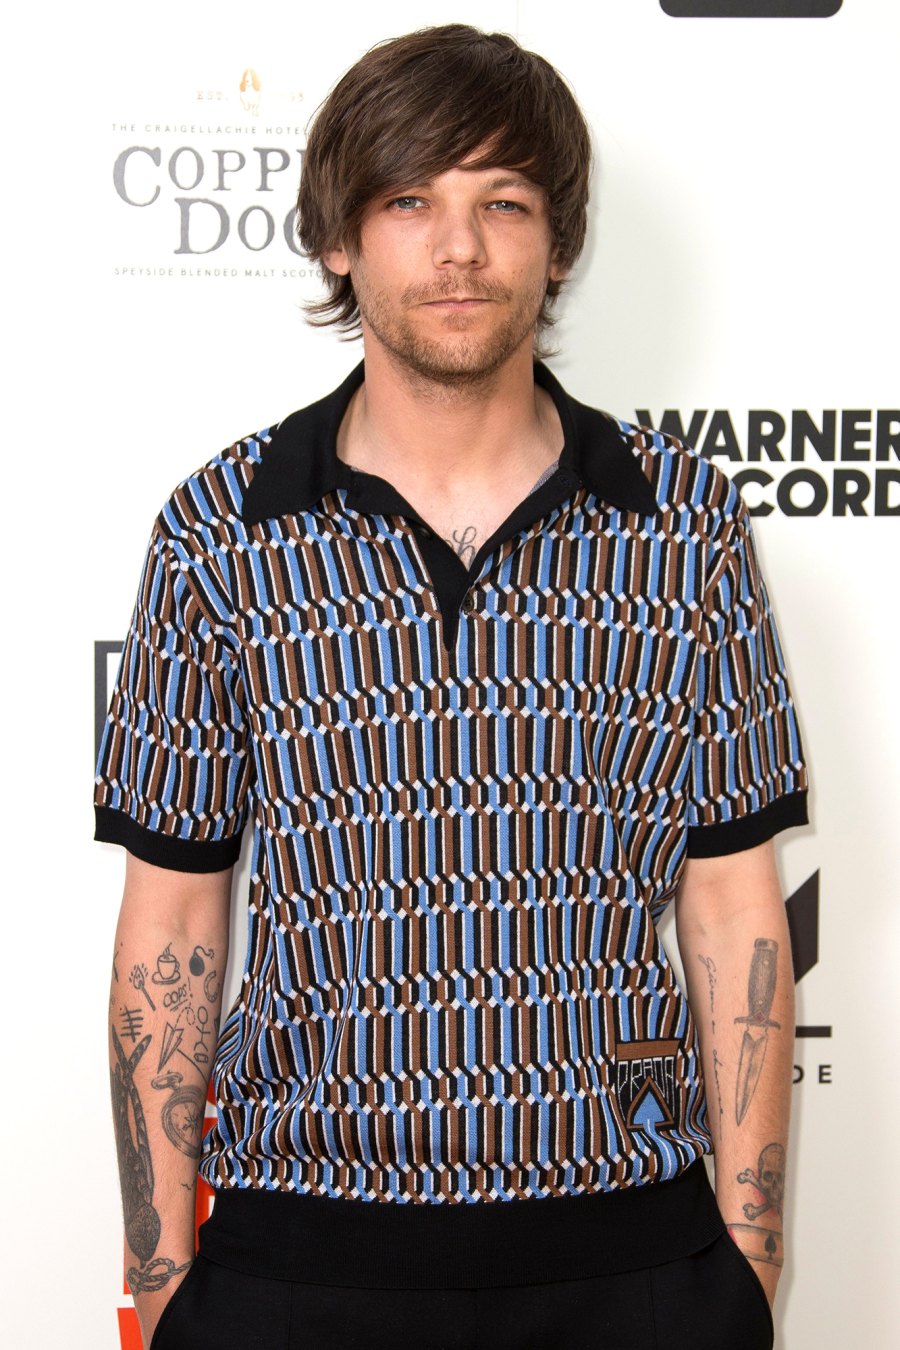 Louis Tomlinson Was 'Mortified' by One Direction Split, Is 'Up' for Reunion